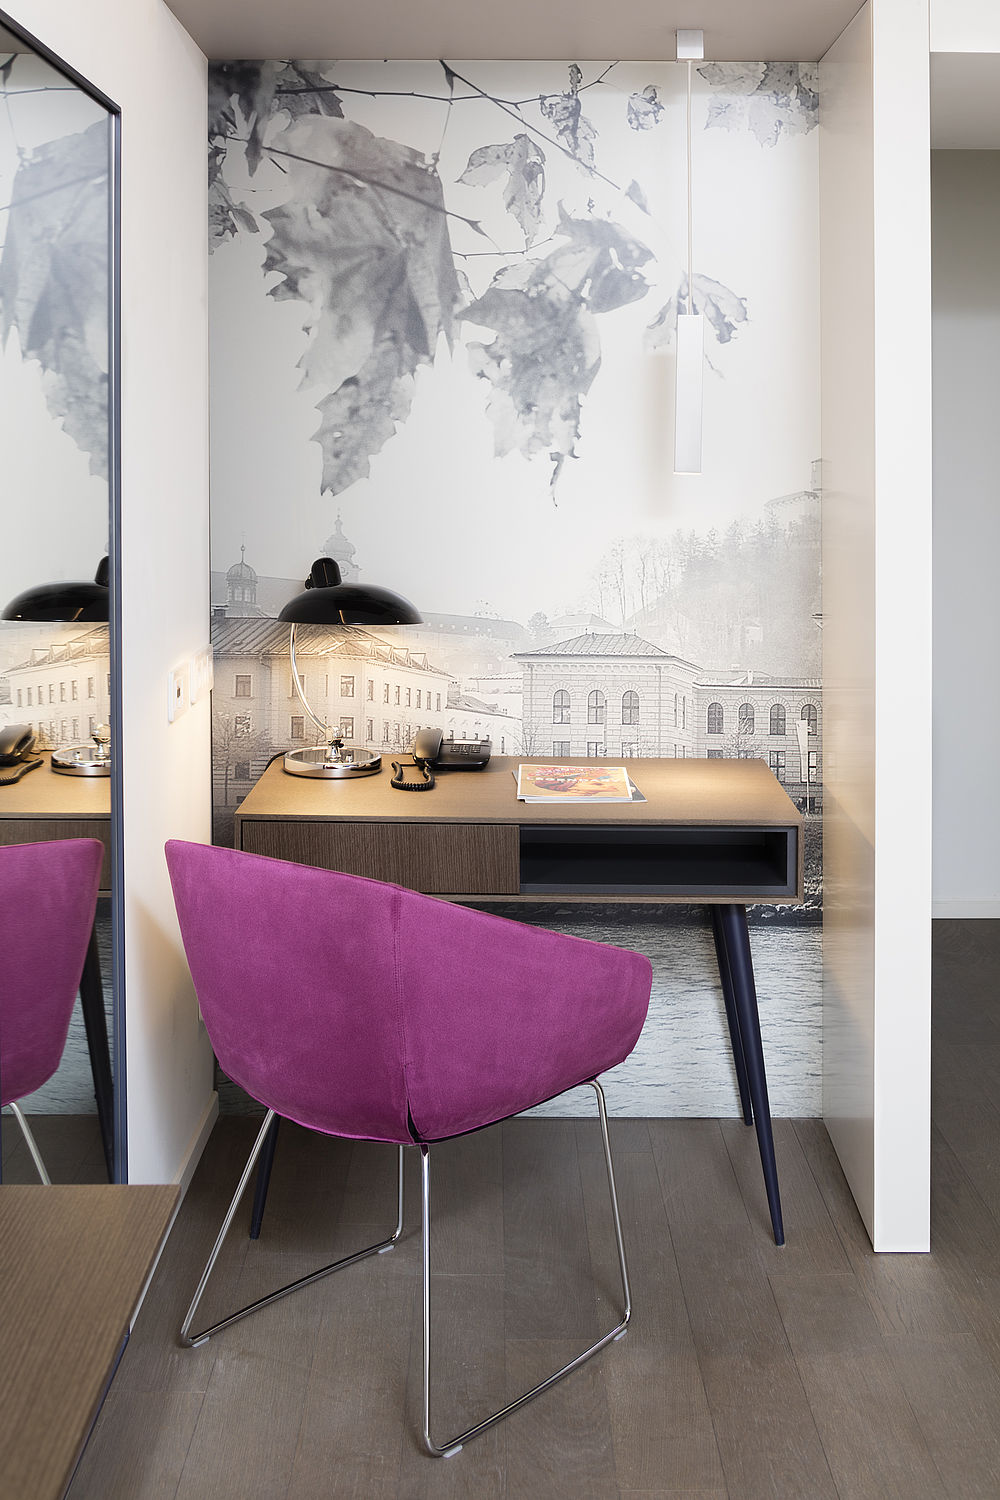 Workplace in the junior suite of the design hotel Stein in Salzburg with a lilac-colored design armchair and desk in Scandi style